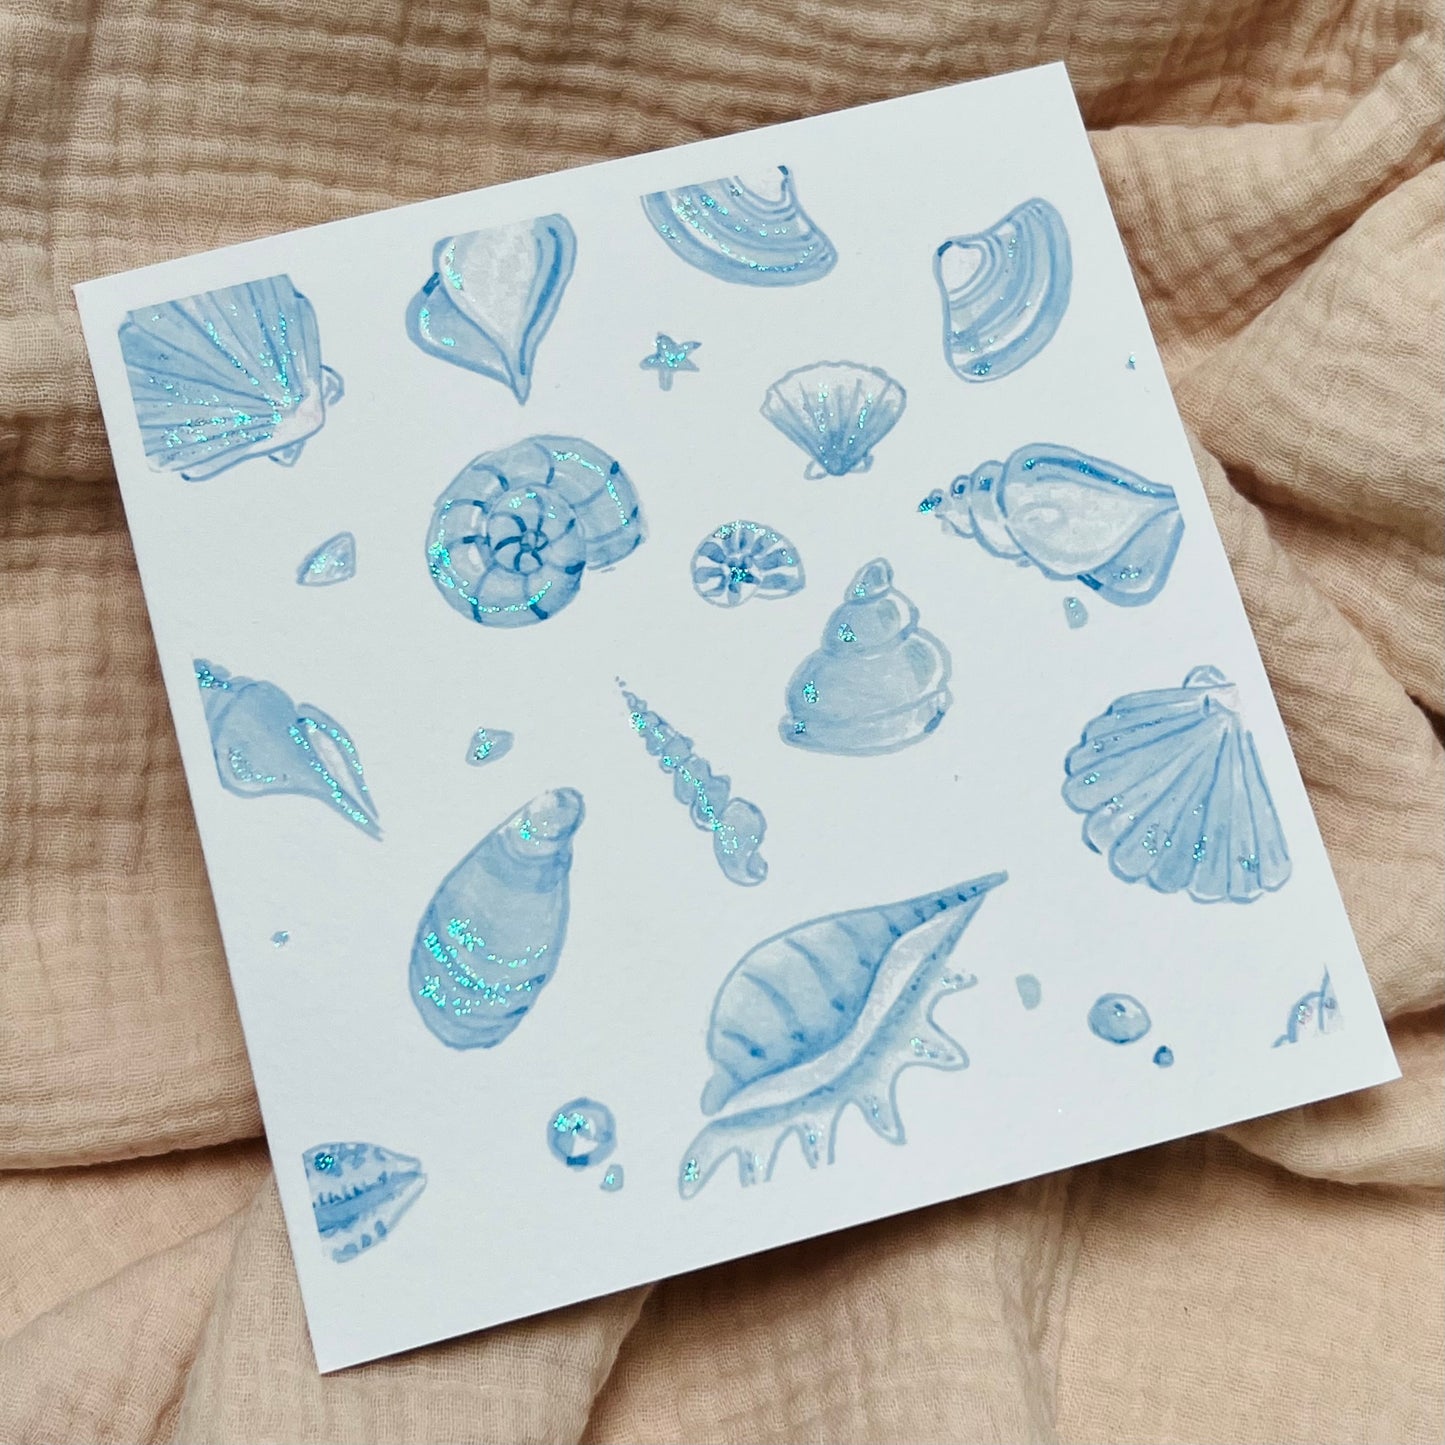 watercolour art print of all blue seashells - with added sparkles